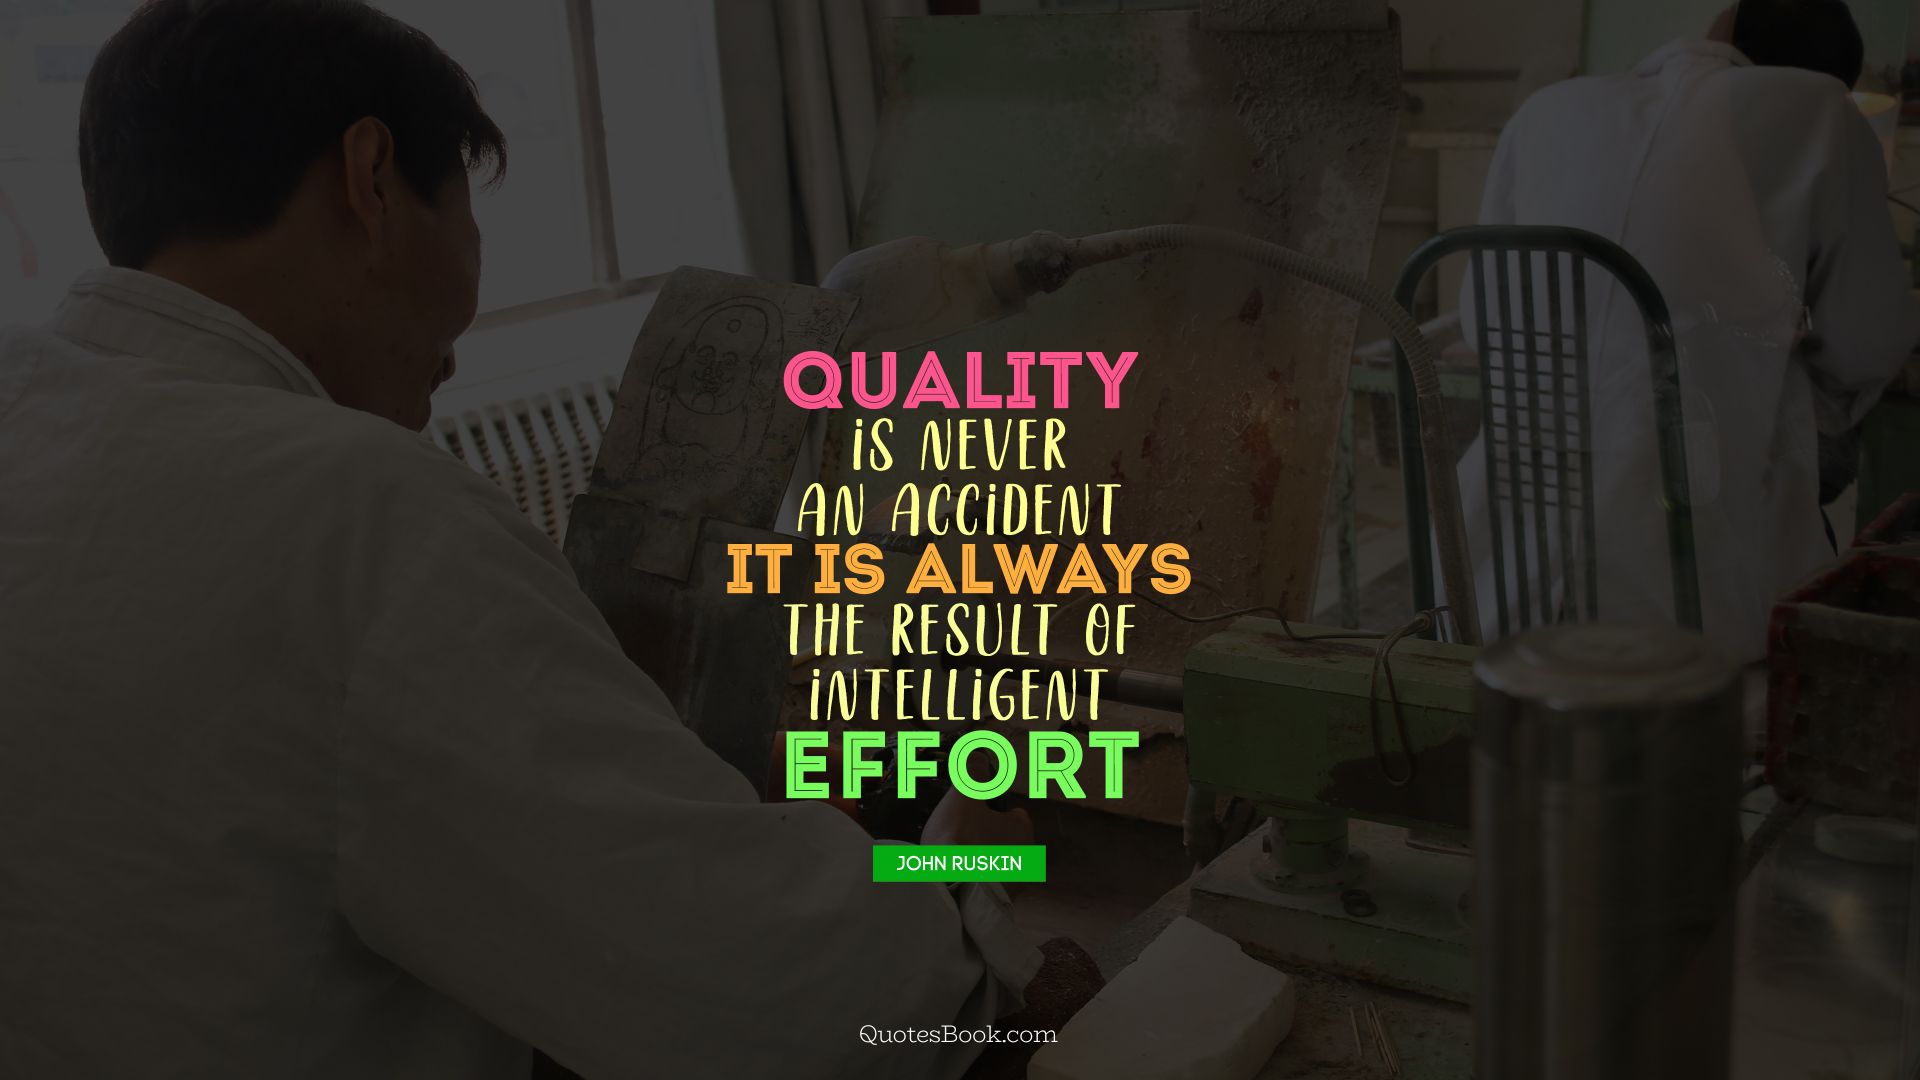 Quality is never an accident. It is always the result of intelligent effort. - Quote by John Ruskin